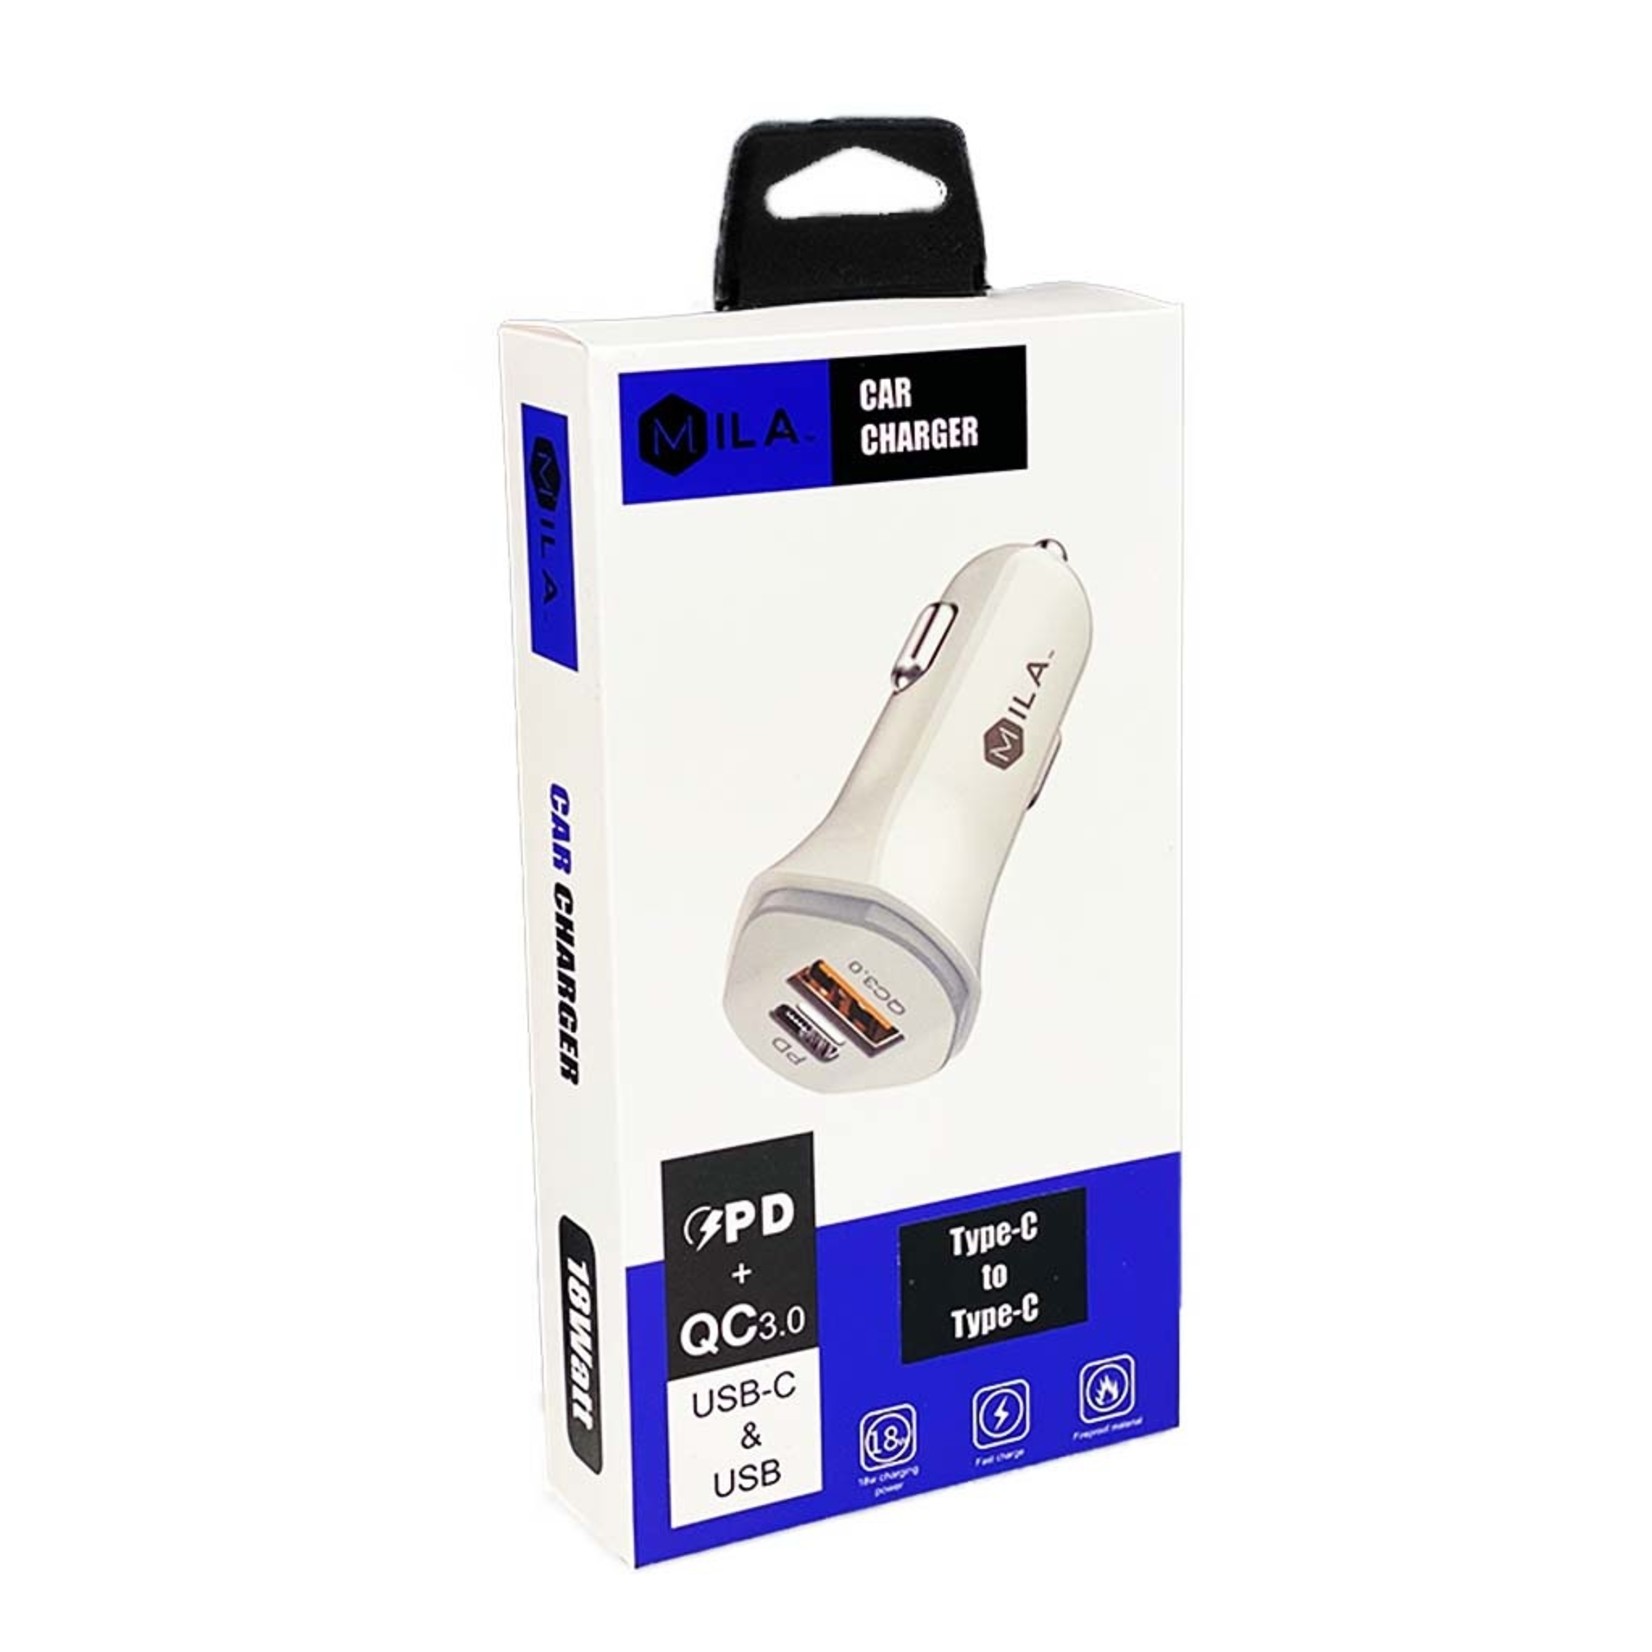 MILA | 3.0A Fast Charge USB and USB-C Port Car Charger with Type C to Type C Cable